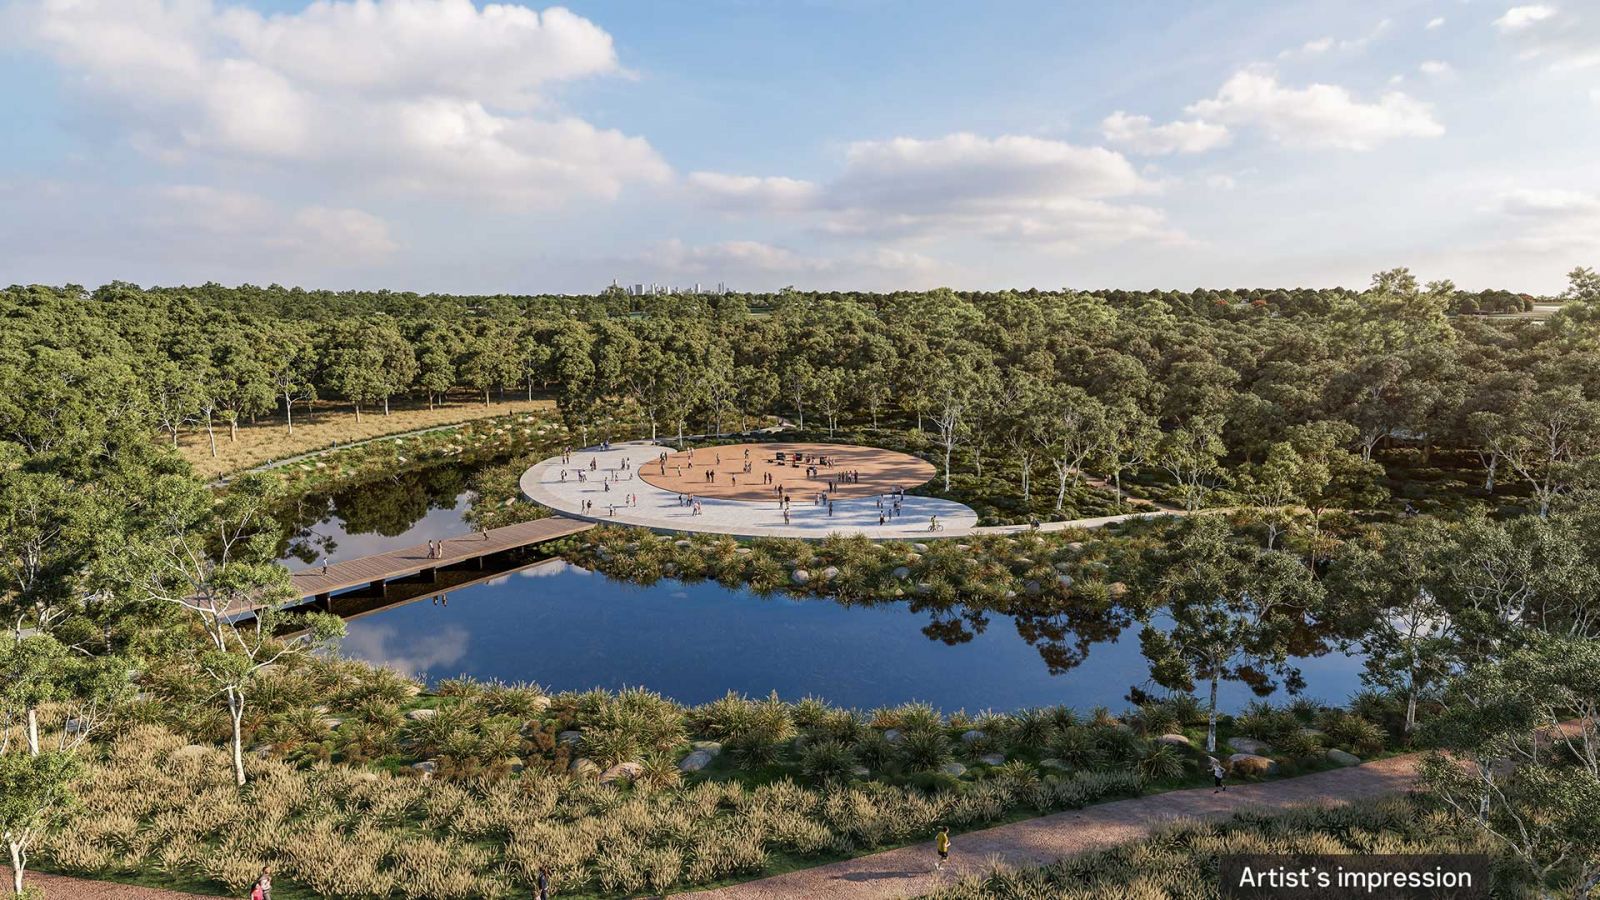 Artist’s impression view of new 1,800m2 wetland along the Yarra River. The new wetlands will re-establish a significant cultural landscape for the Wurundjeri people and create an Indigenous knowledge sharing precinct for Melbourne.  